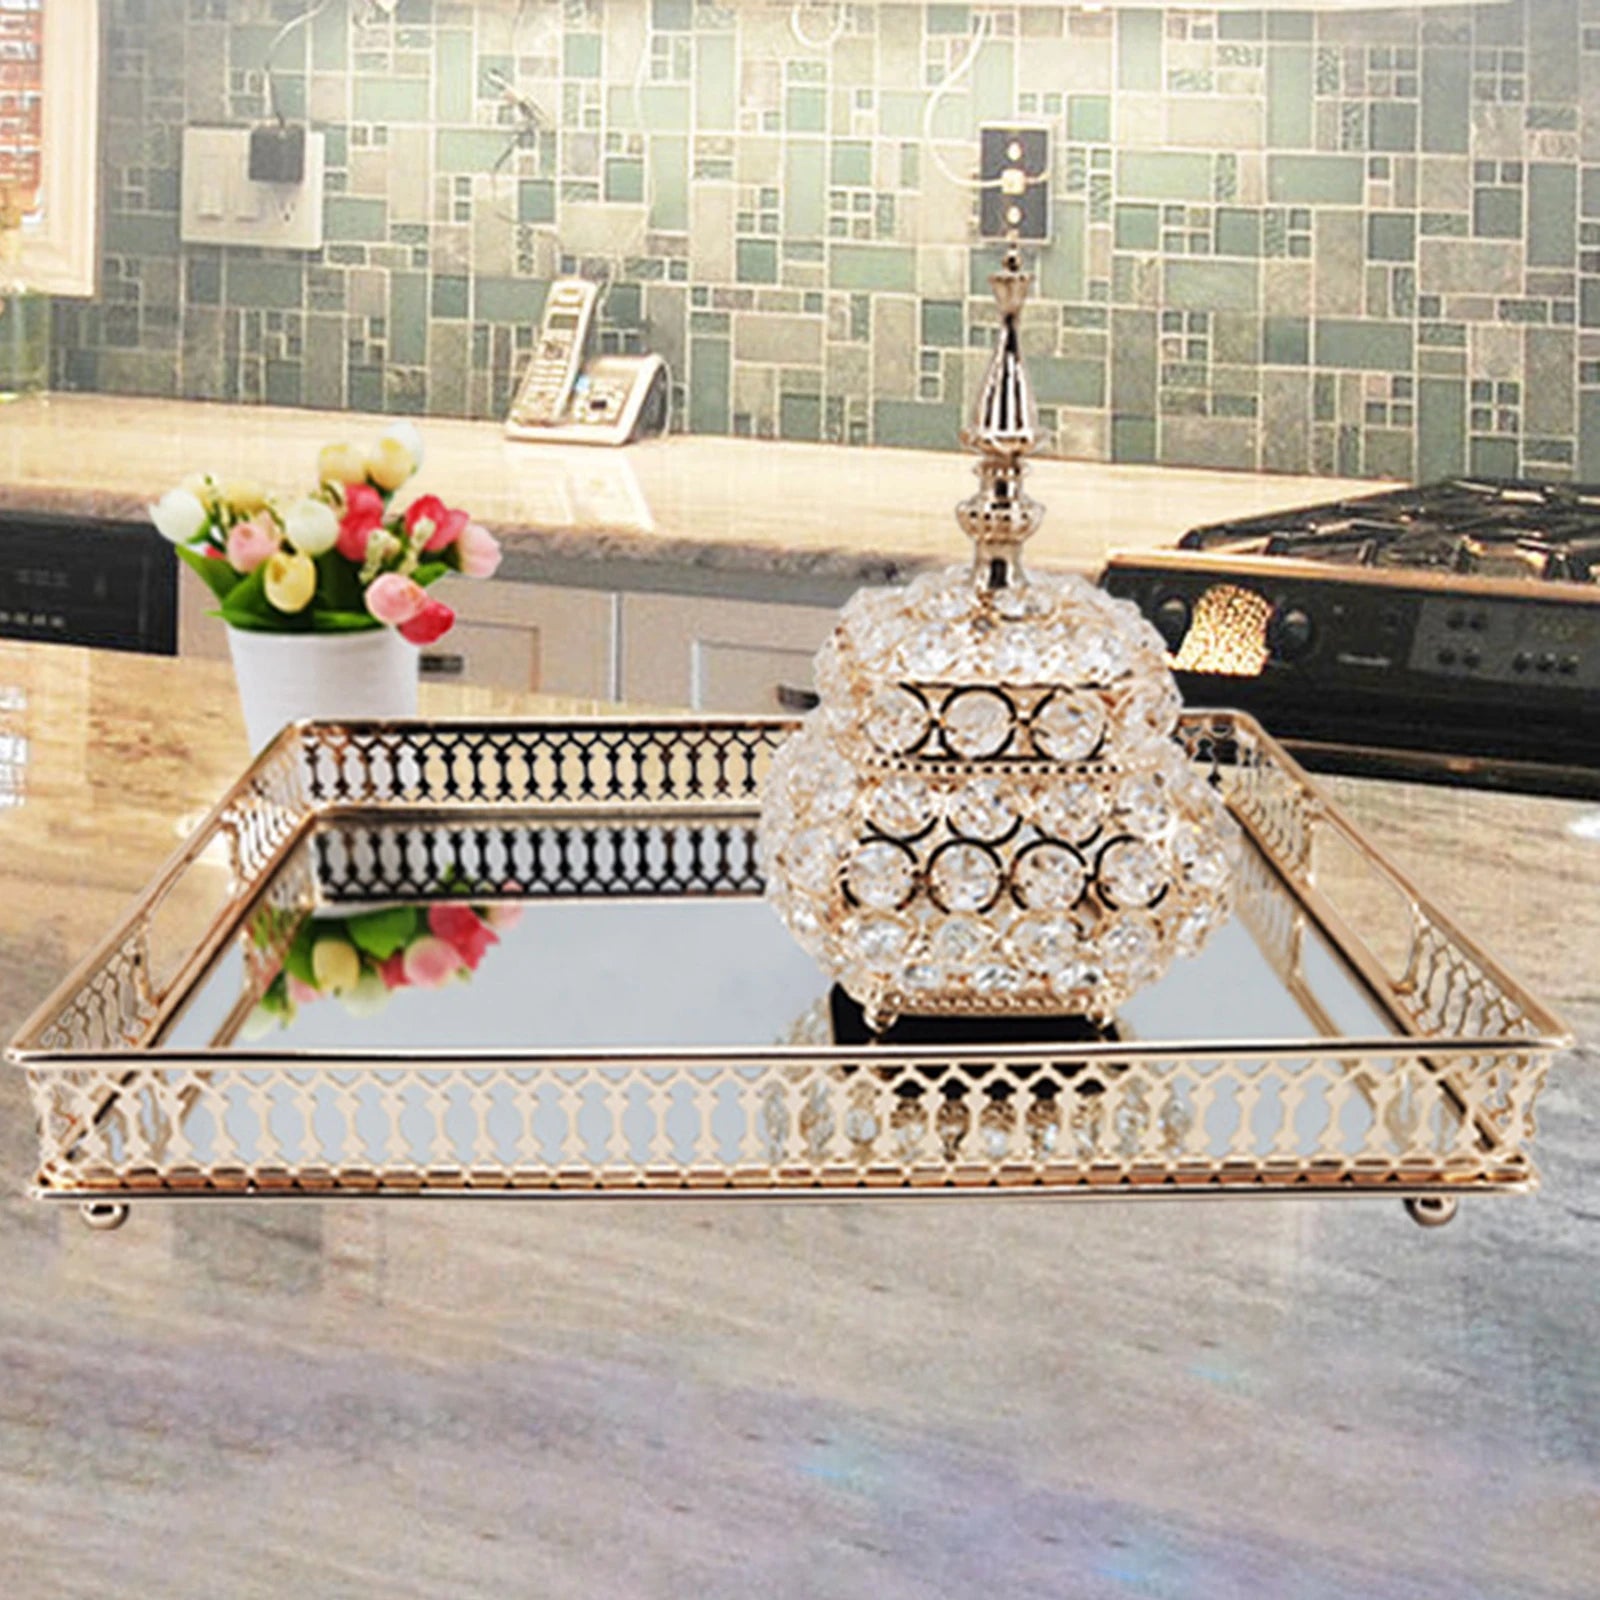 Steven Store™ Decorative Mirror Tray: Elegant mirror tray for organizing and showcasing items